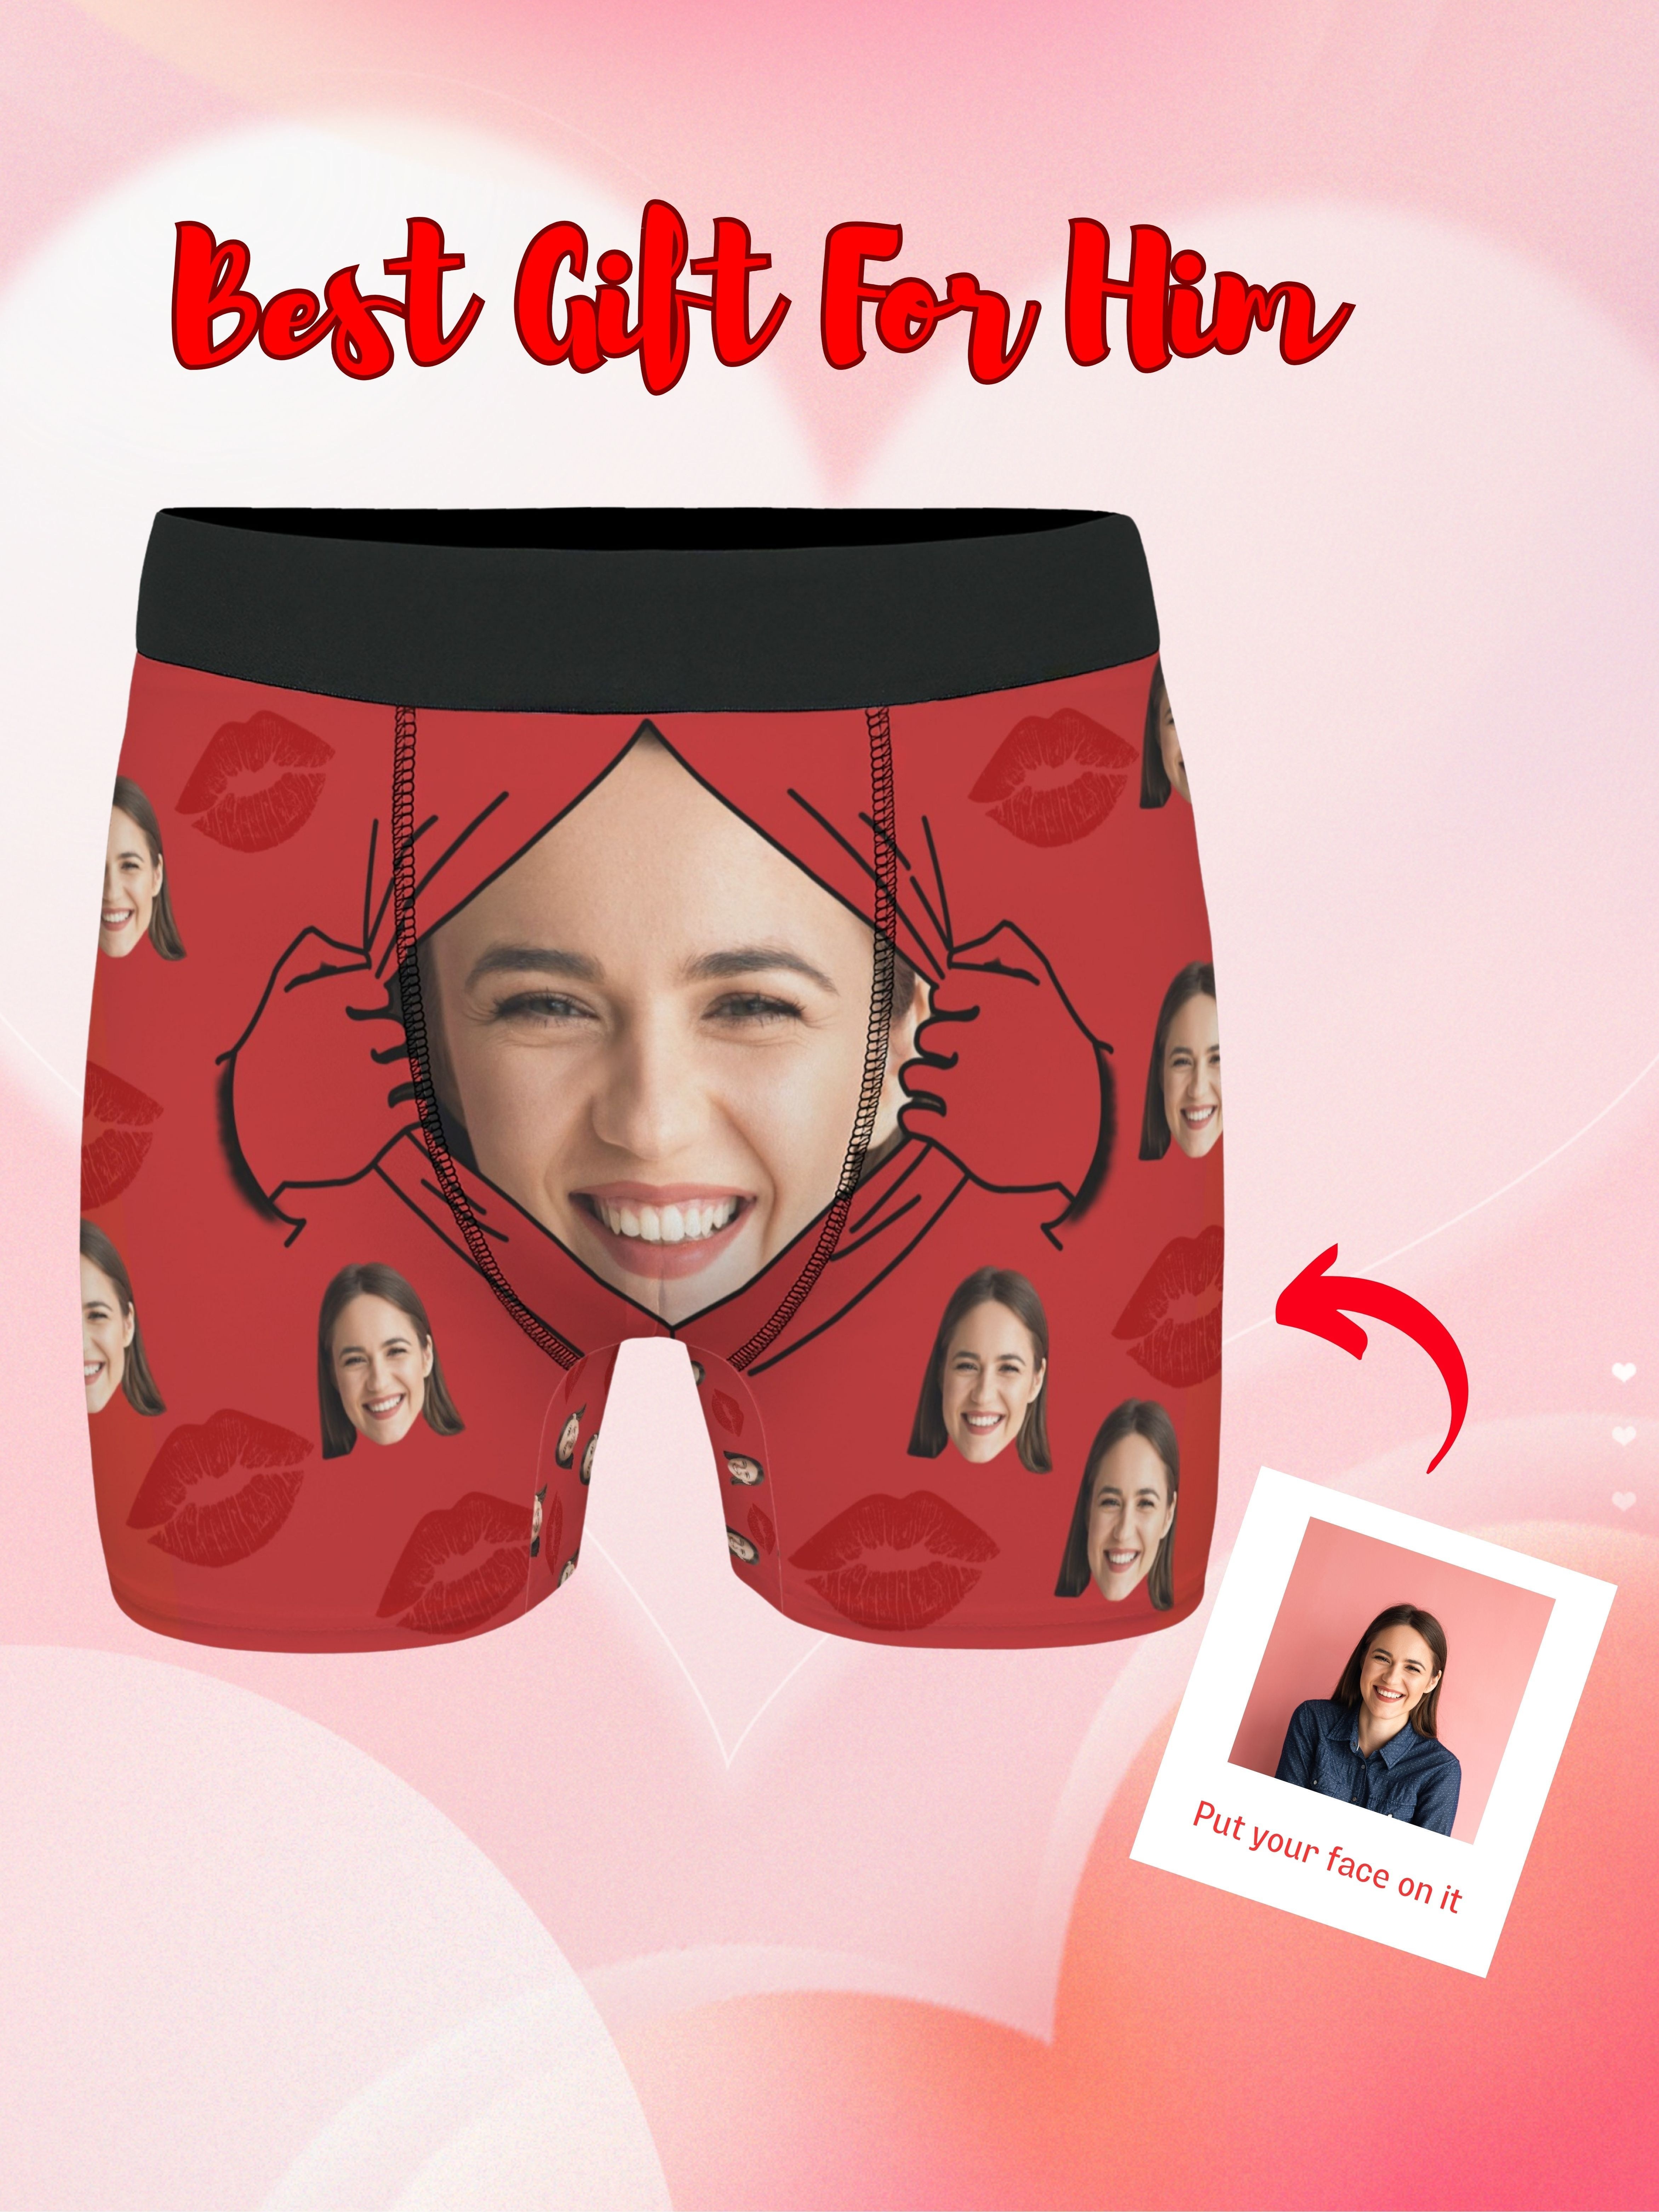 Best Deal for Custom Underwear Personalized Face Boxer Briefs for